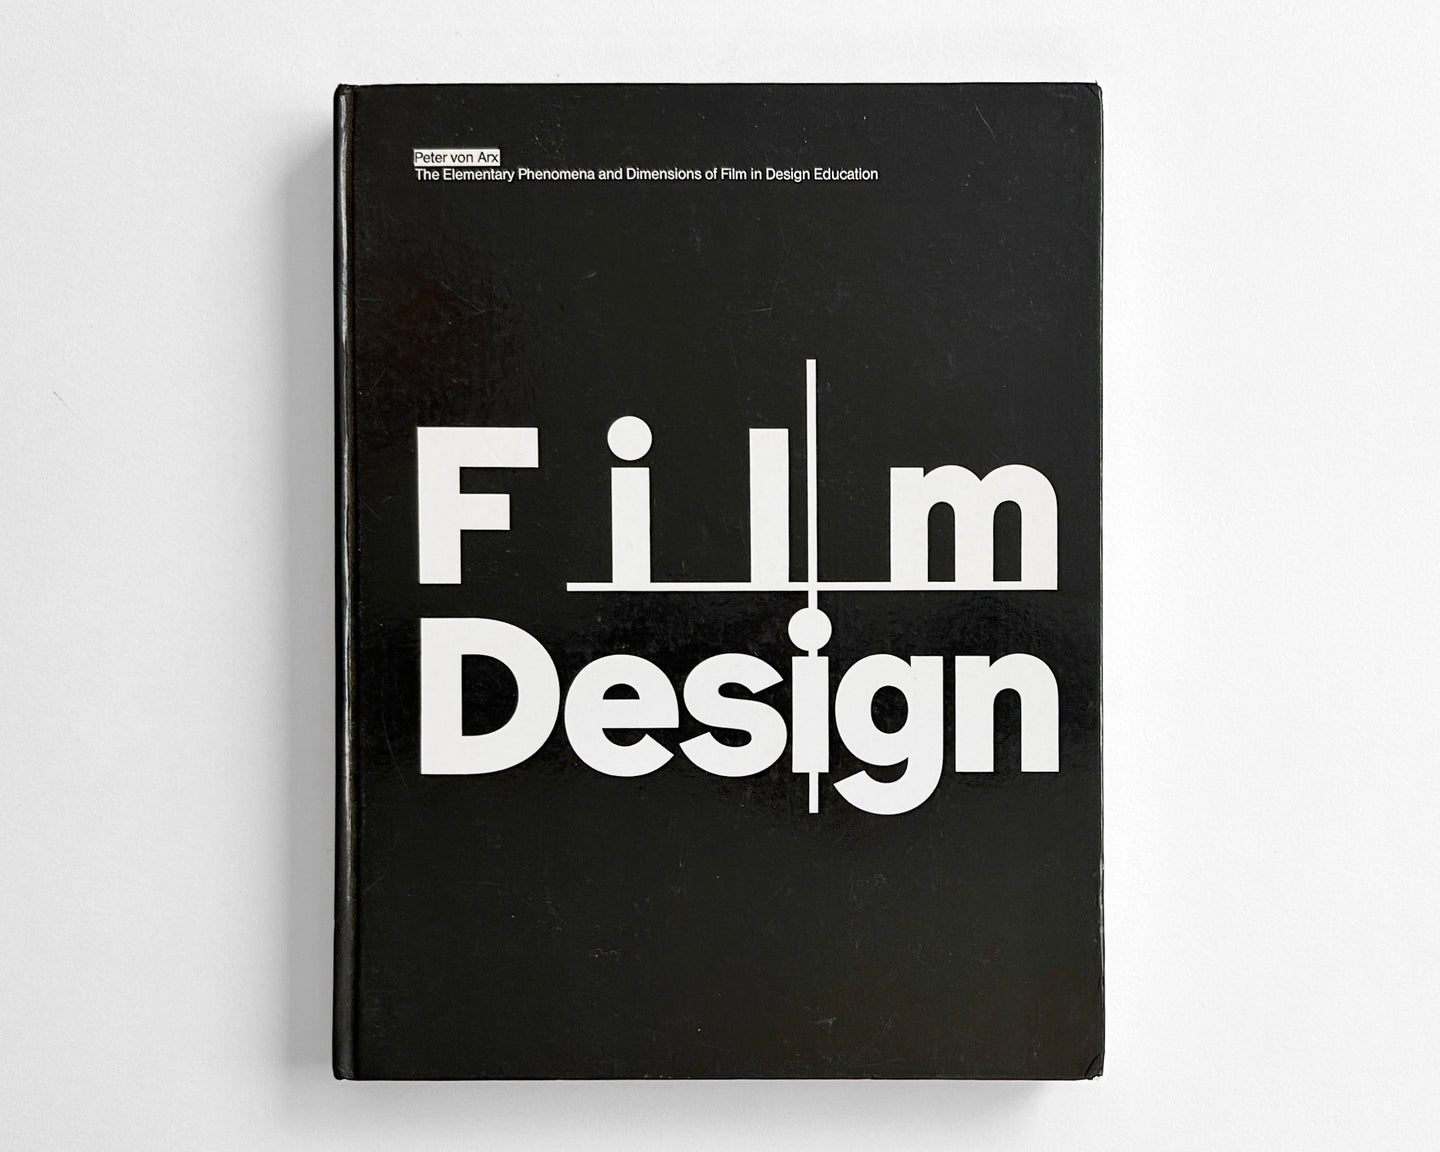 Film Design by Peter von Arx [Design Education at the AGS Basel, Graduate School of Design]